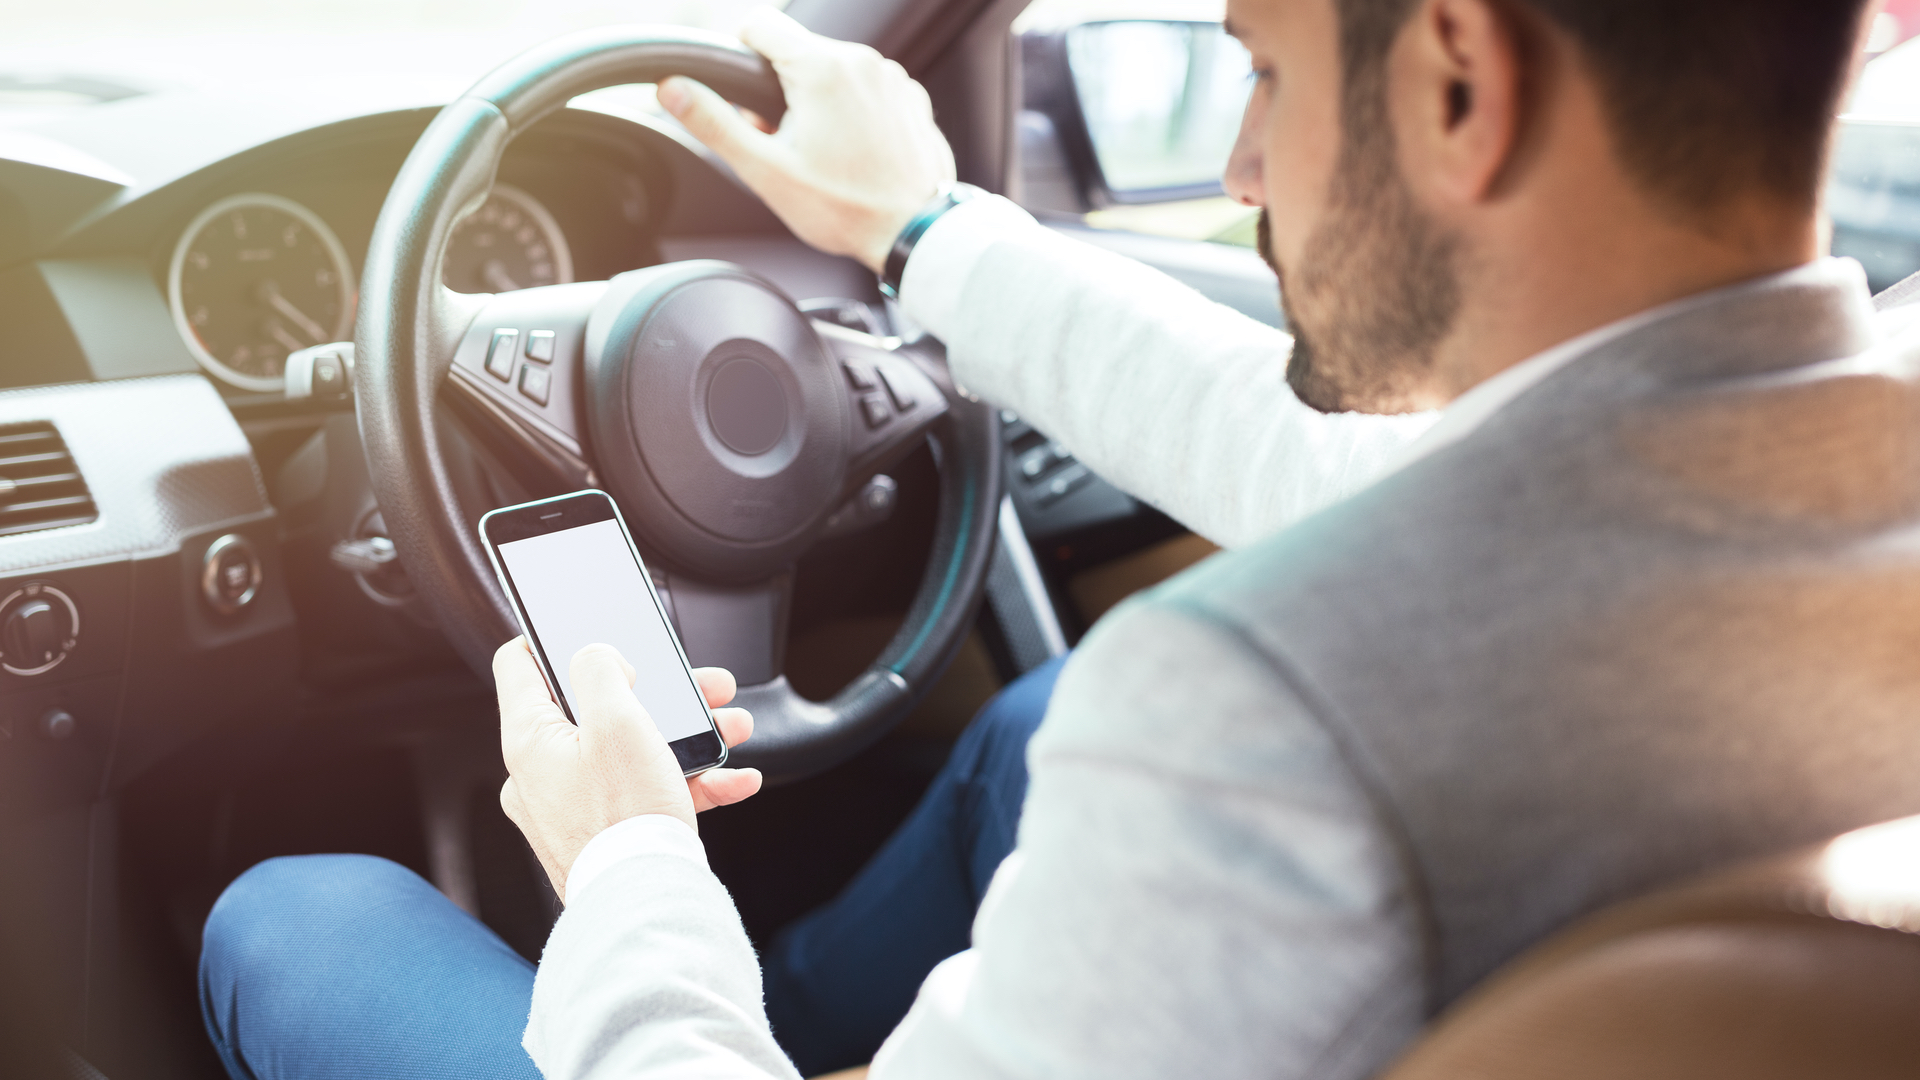 Opinion on mobile phone use at the wheel